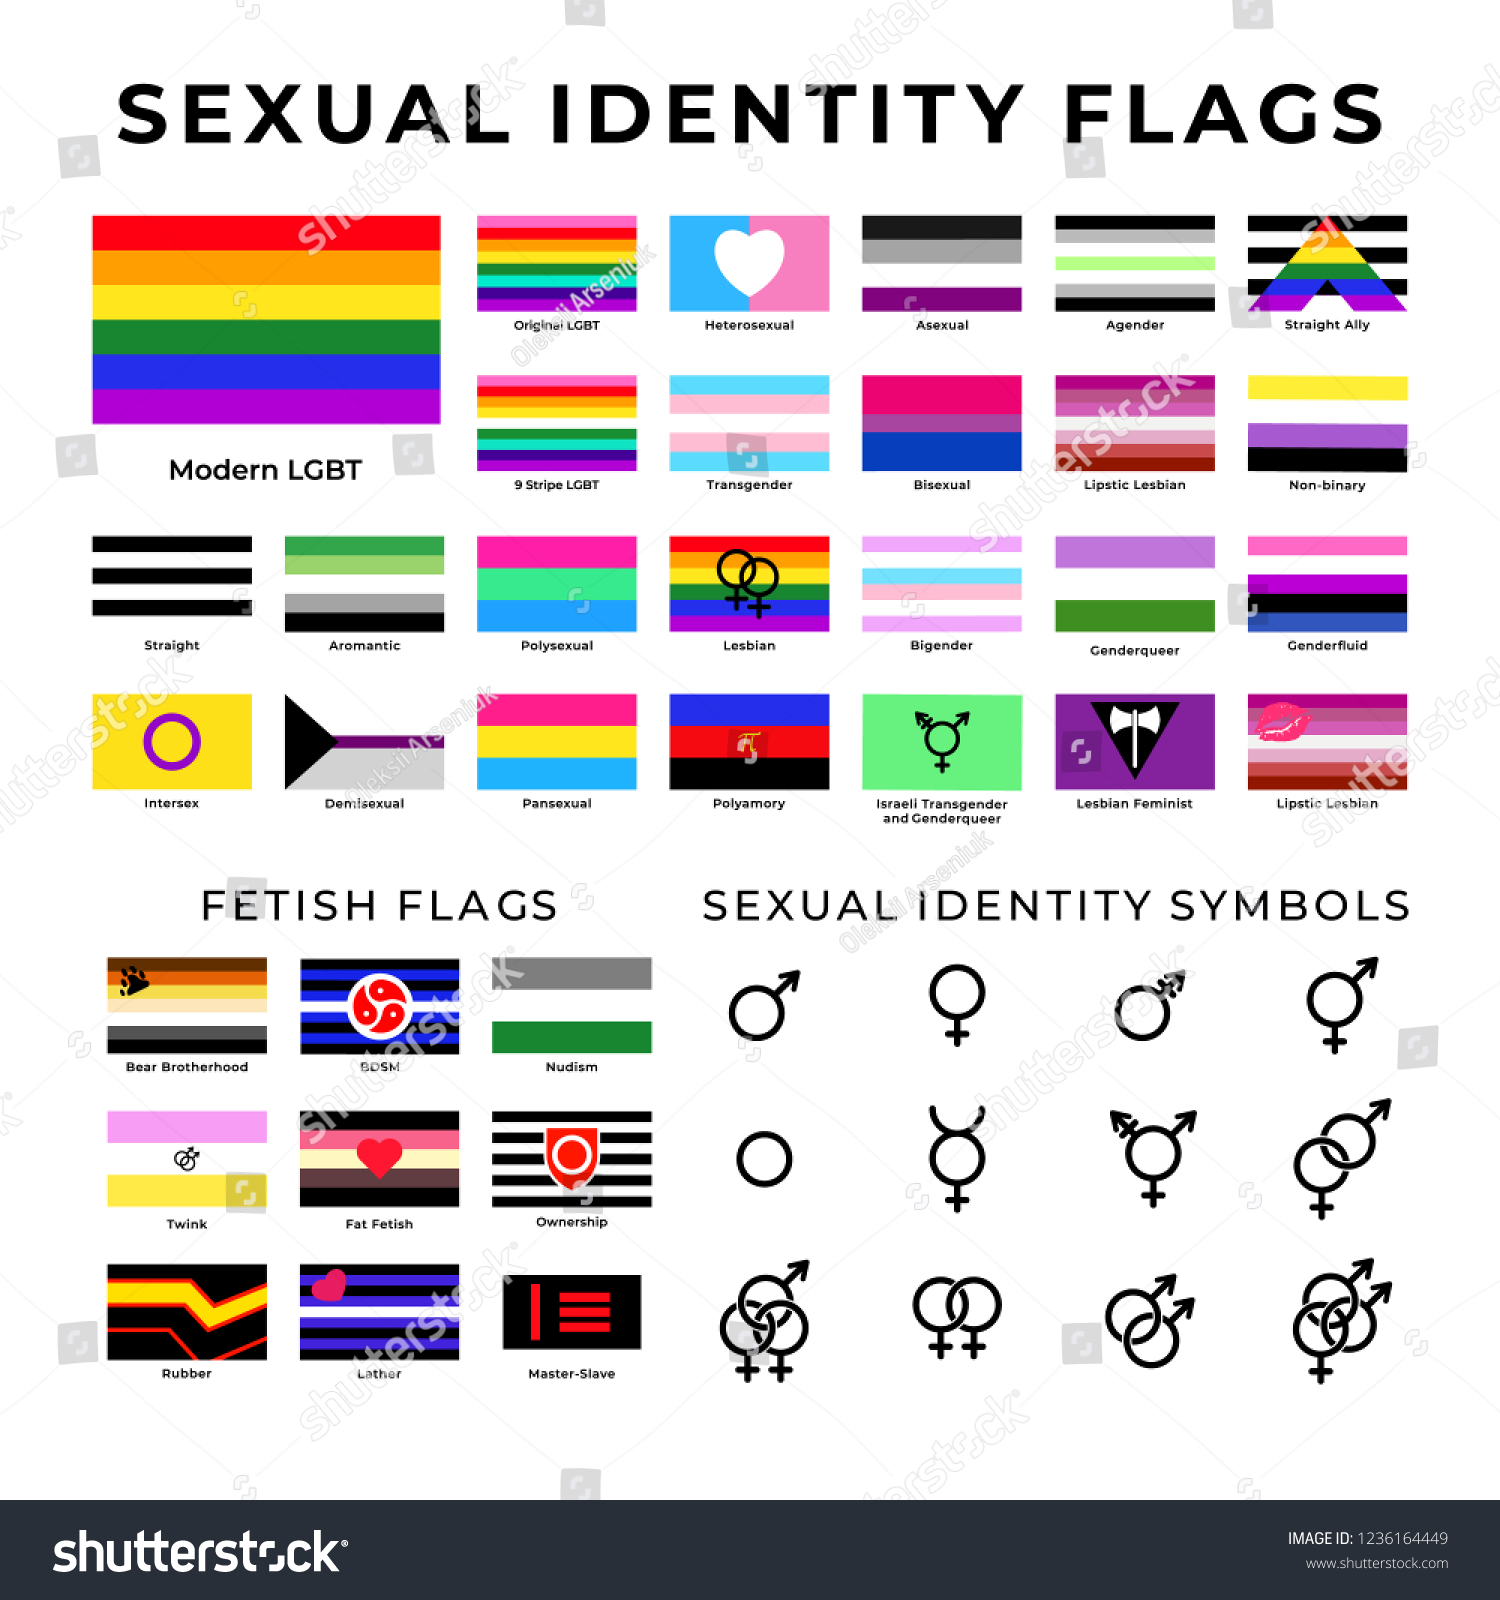 Sexual Identity Flags Symbols Lgbt Straight Stock Vector Royalty Free